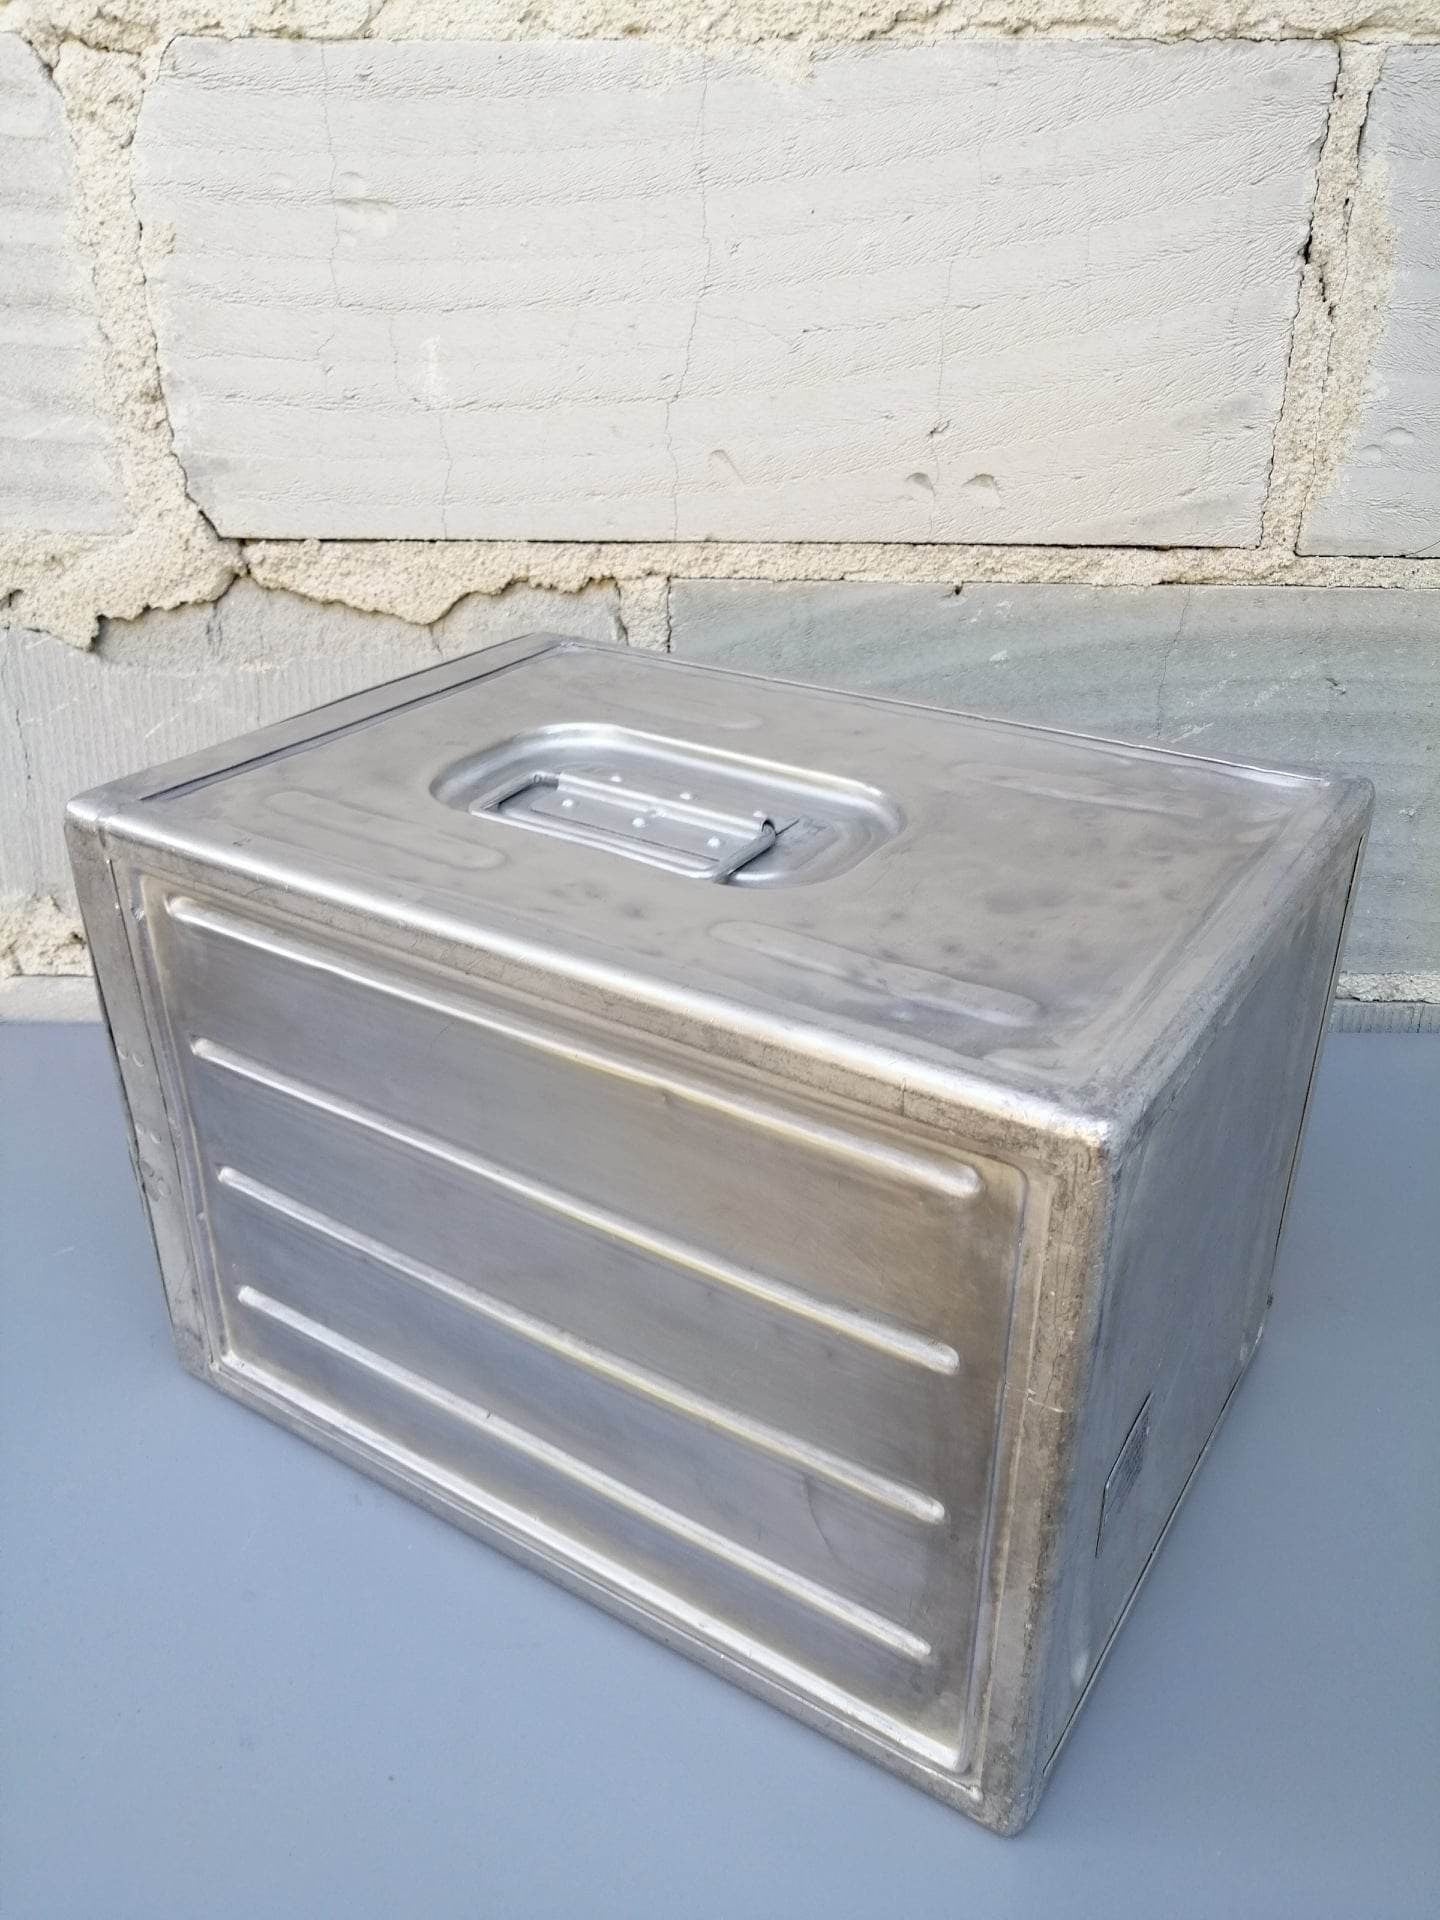 Iacobucci Italy Airline Galley Box, Aircraft Storage Container, Industrial Cabinet, Beautiful Vintage Flight Box